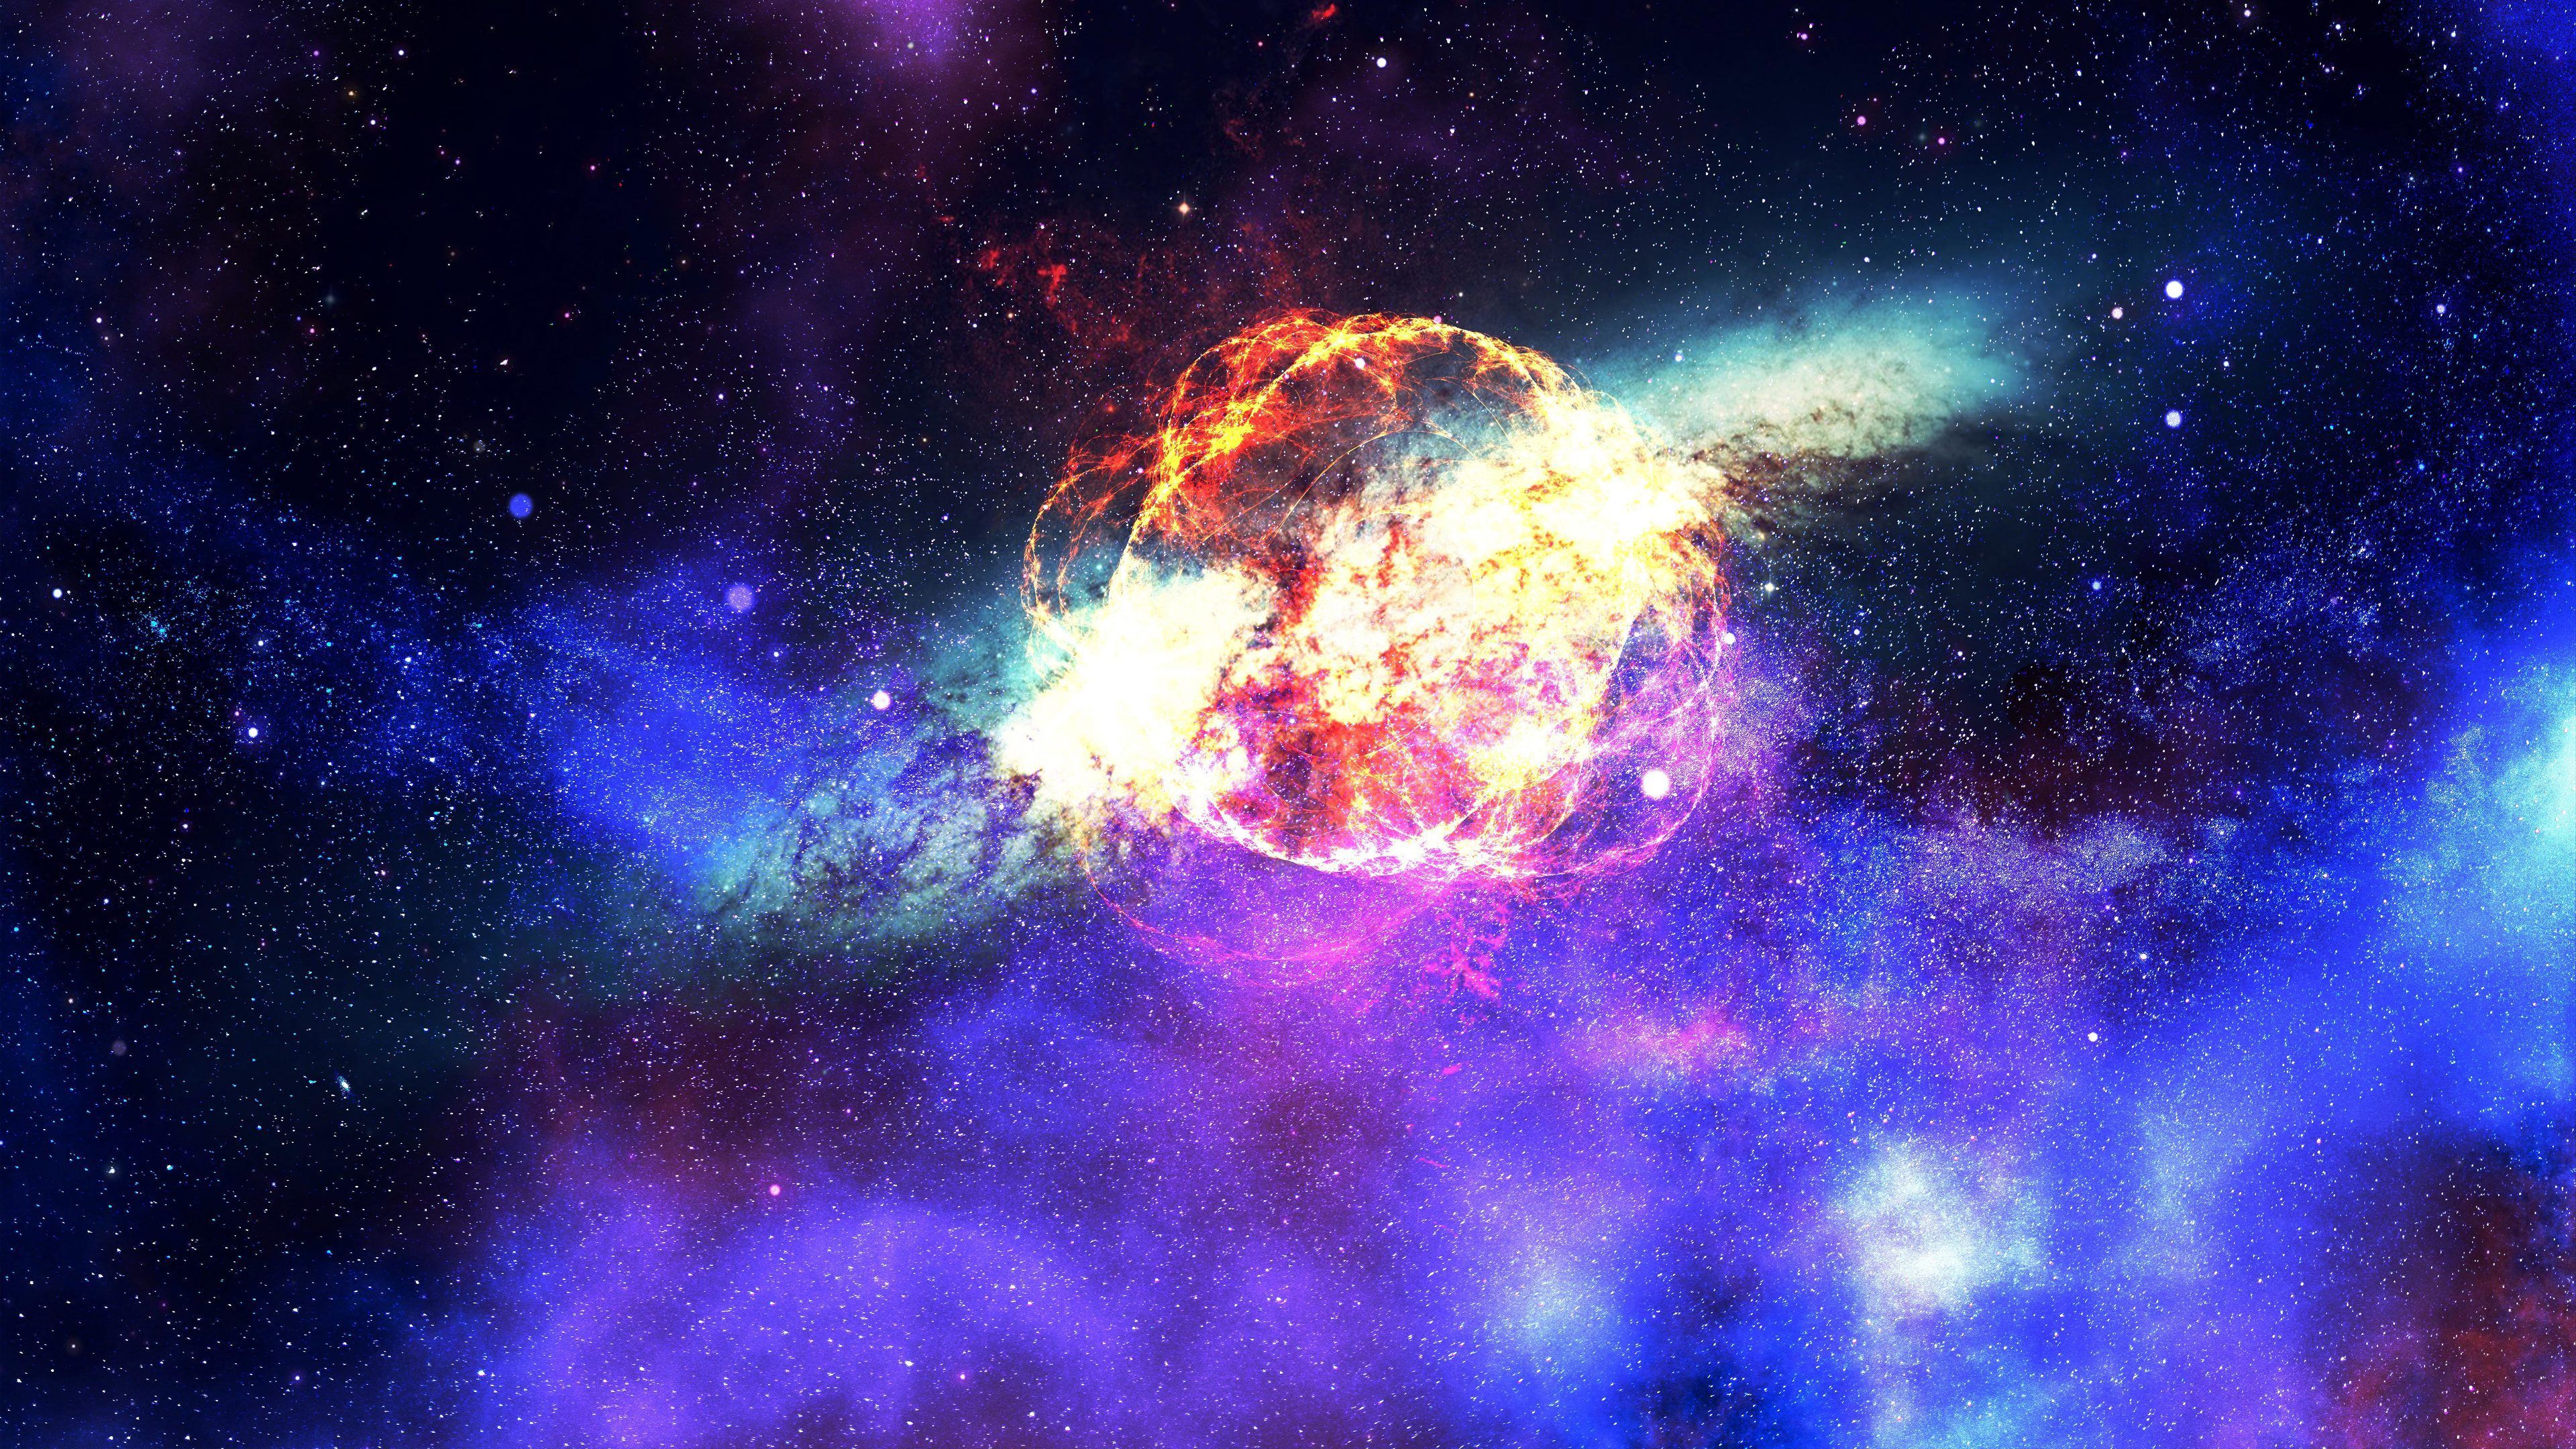 Nebula Galaxy Outer Space 4k space wallpaper, nebula wallpaper, hd- wallpaper, galaxy wallpaper, dig. Nebula wallpaper, Galaxy wallpaper, Outer space wallpaper